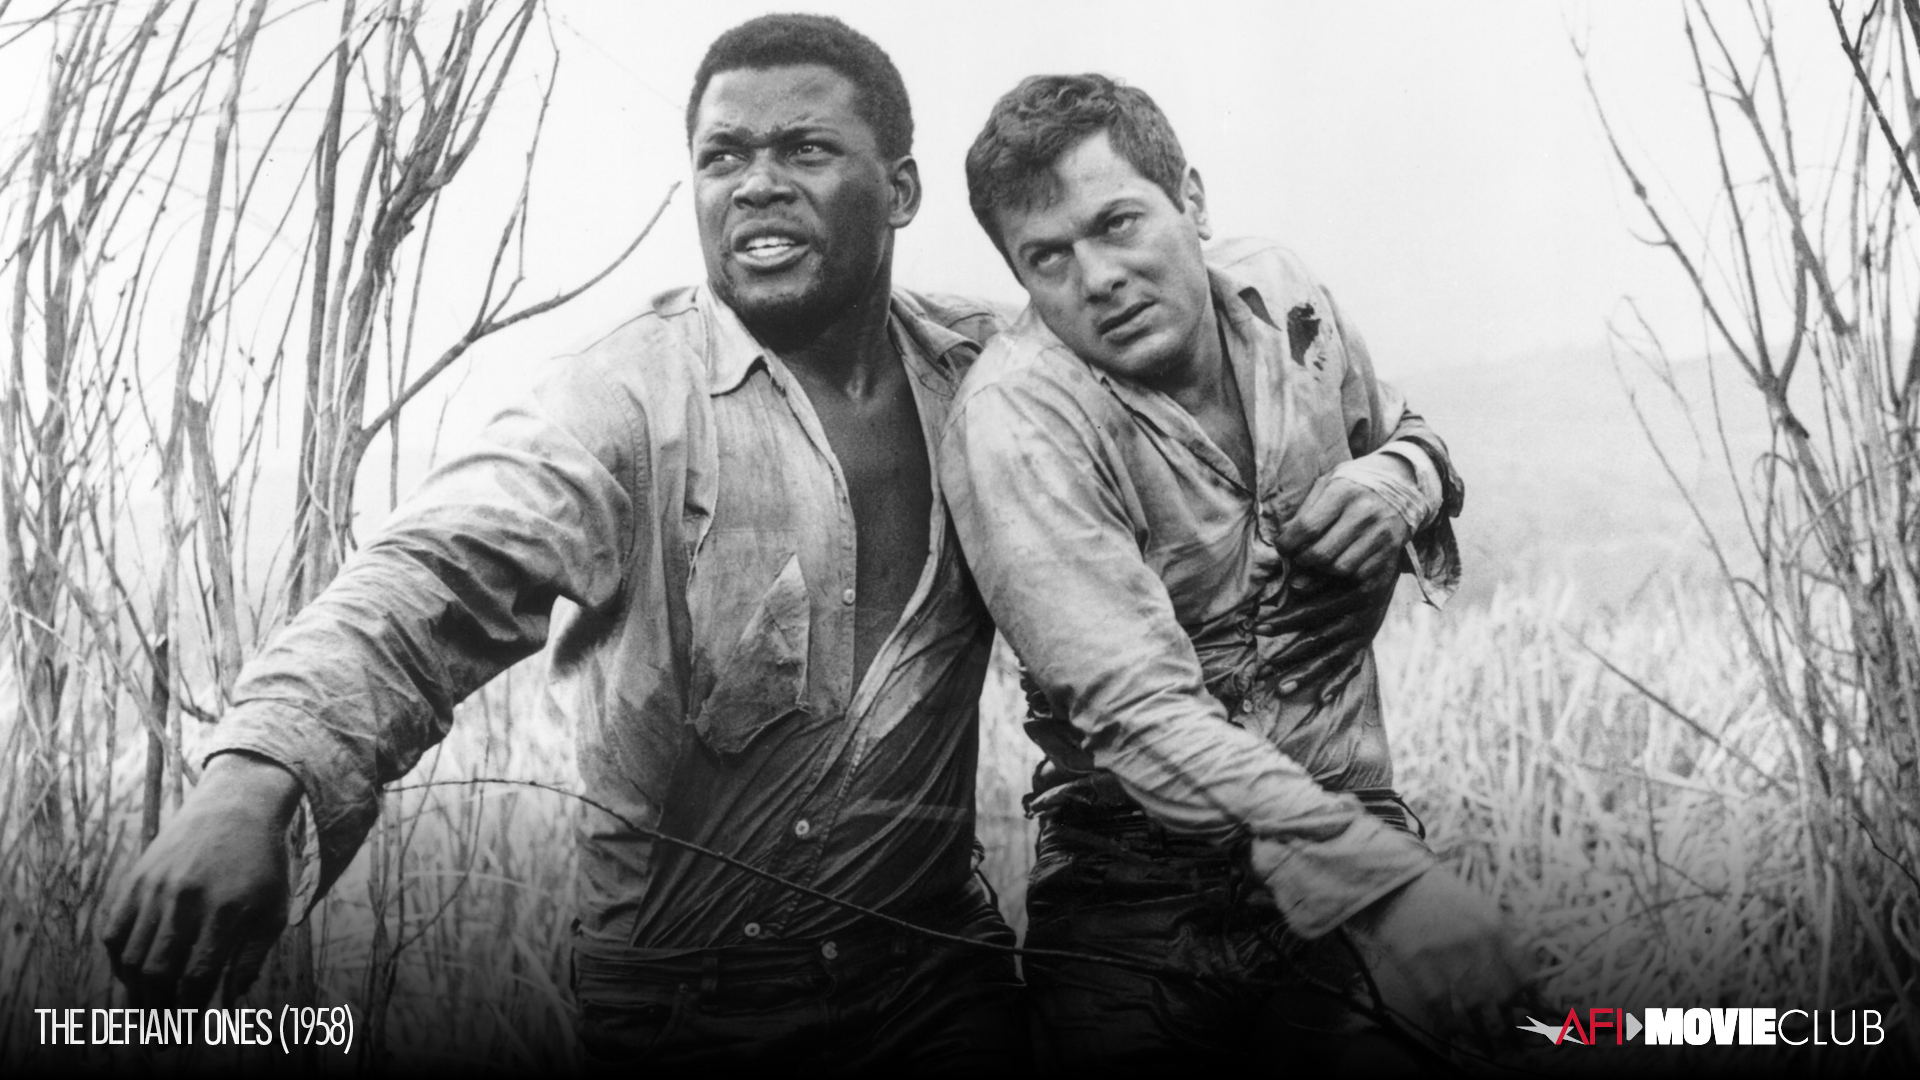 The Defiant Ones Film Still - Tony Curtis and Sidney Poitier